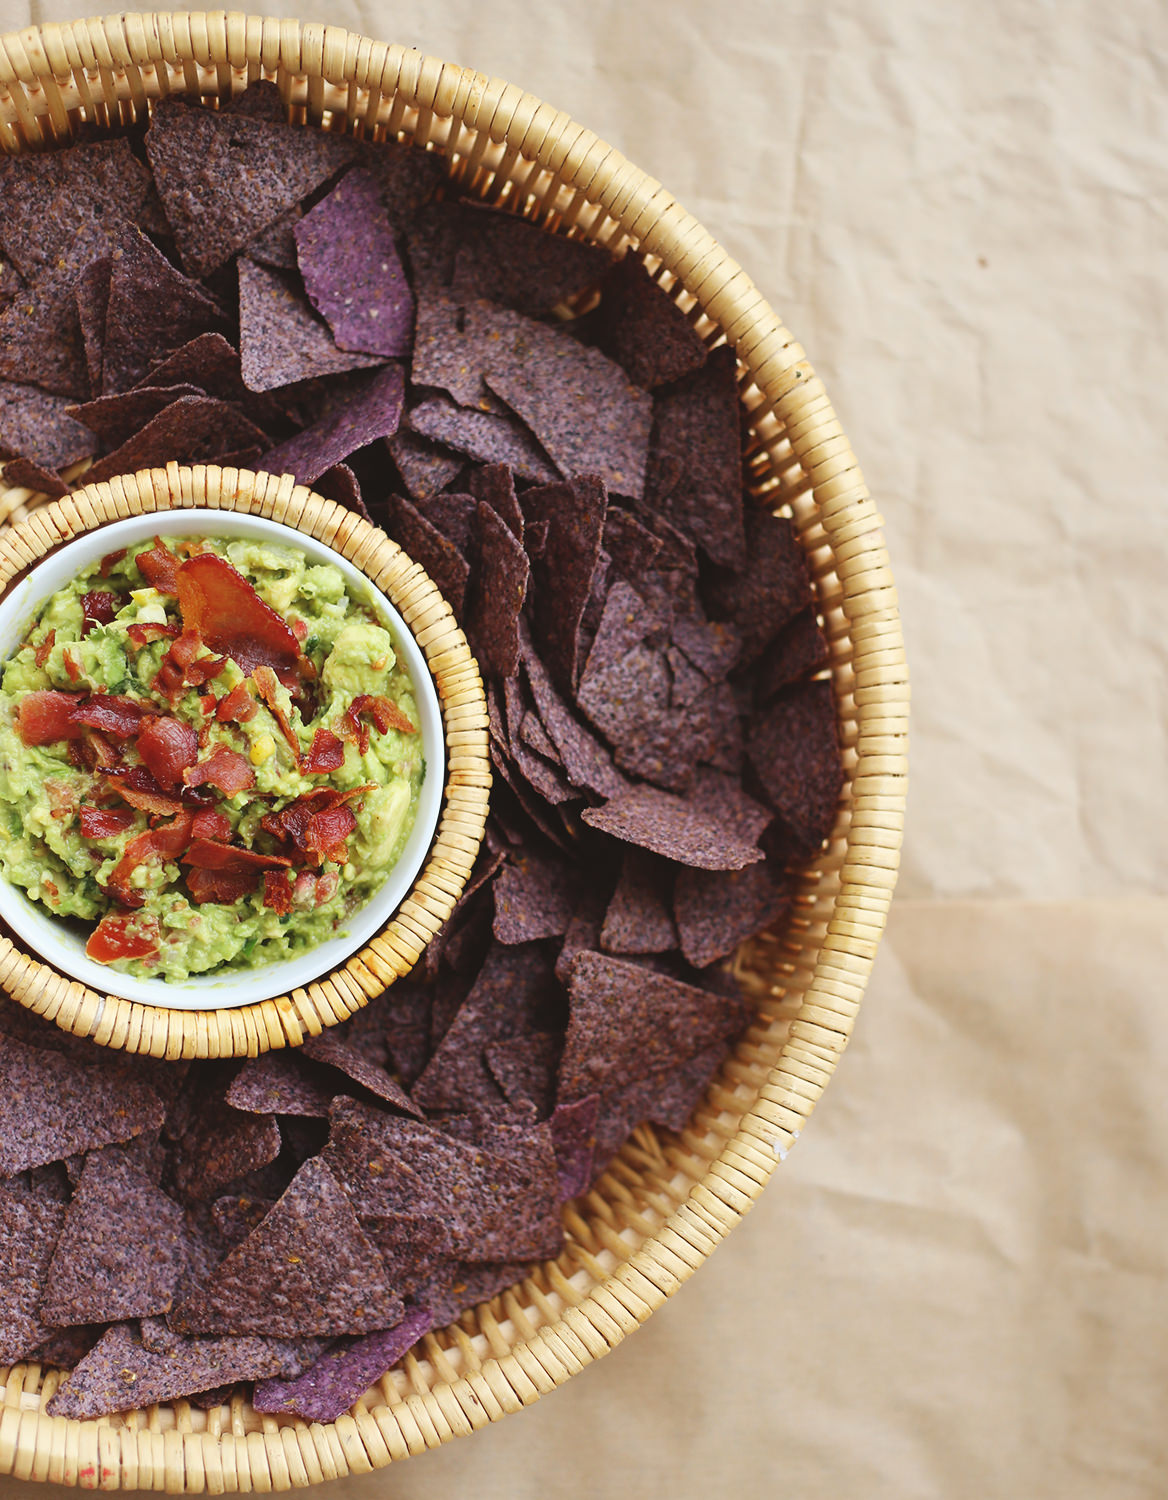 Cook up some extra crispy bacon and crumble over your guacamole recipe. To see other ways of dressing up your dip, go on the blog! // Lily & Val Living!